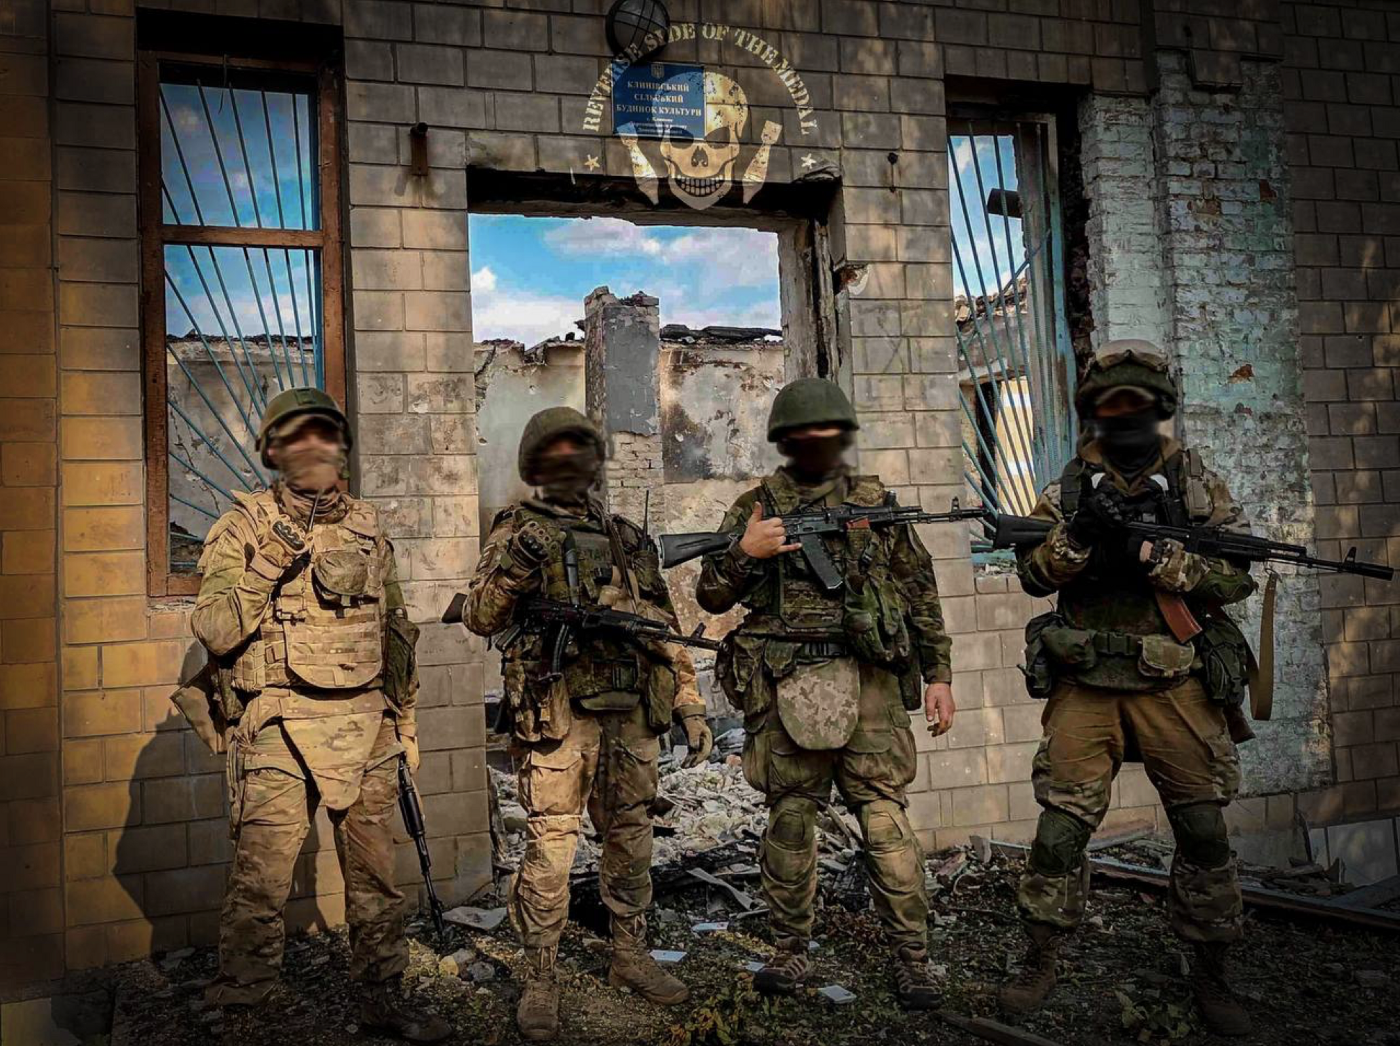 Wagner Group continues involvement in Russian operations in Eastern Ukraine